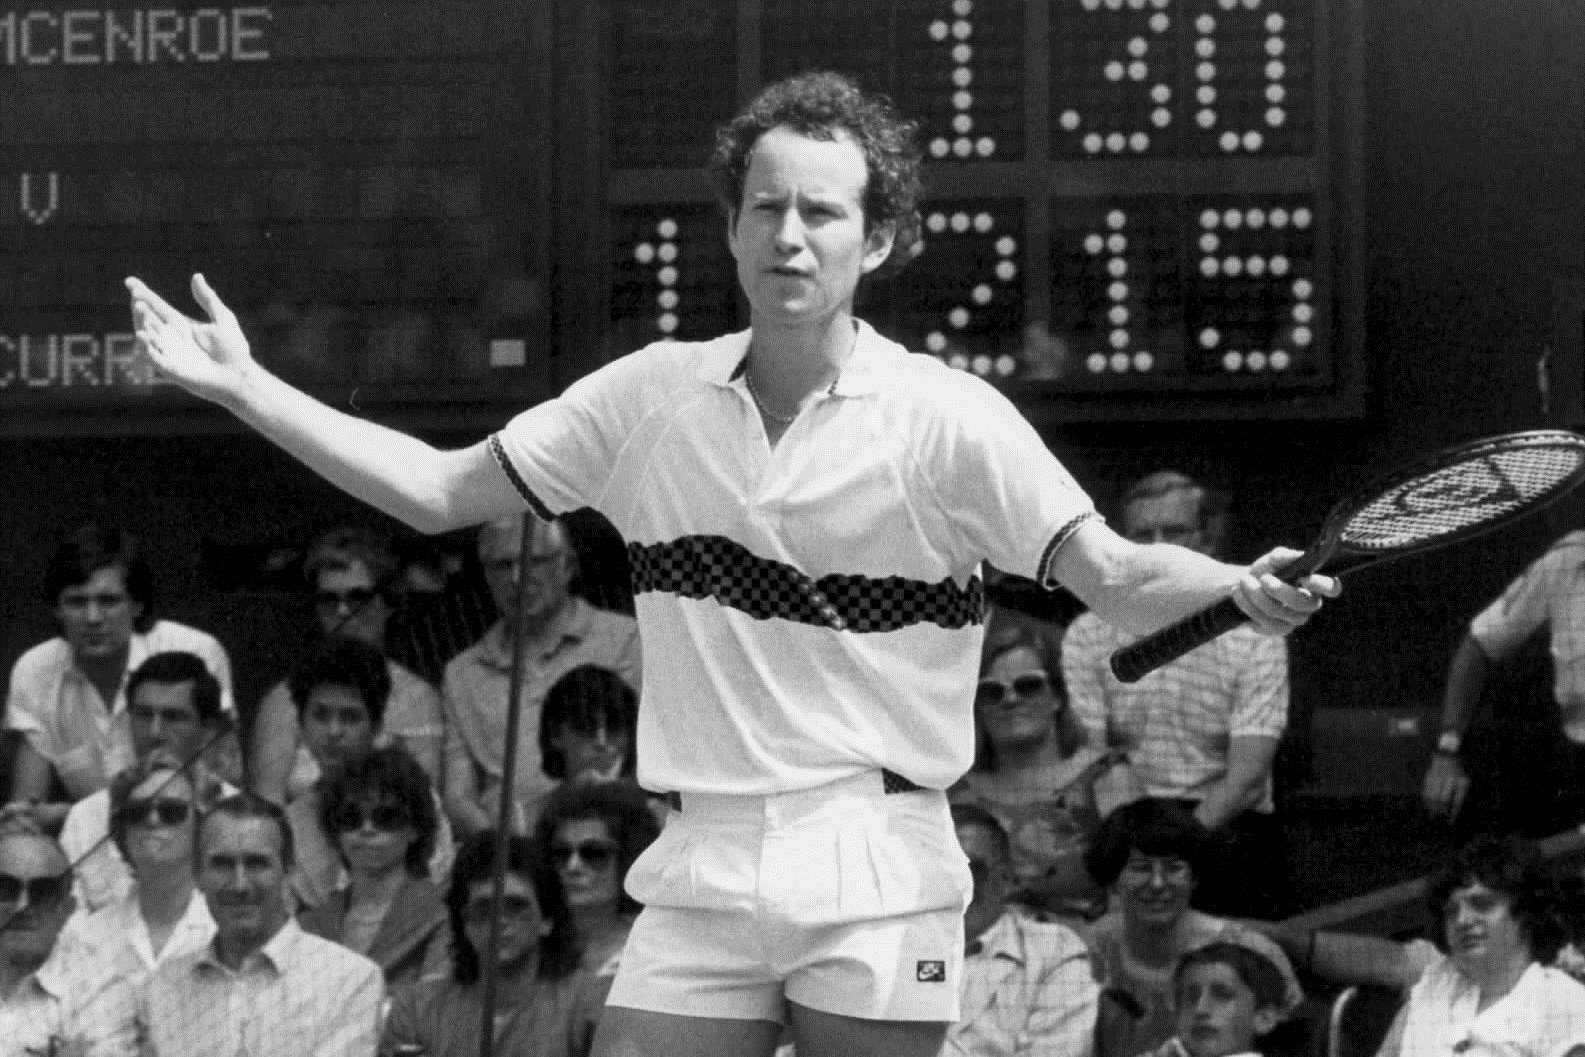 John McEnroe might well disagree with the city council decision